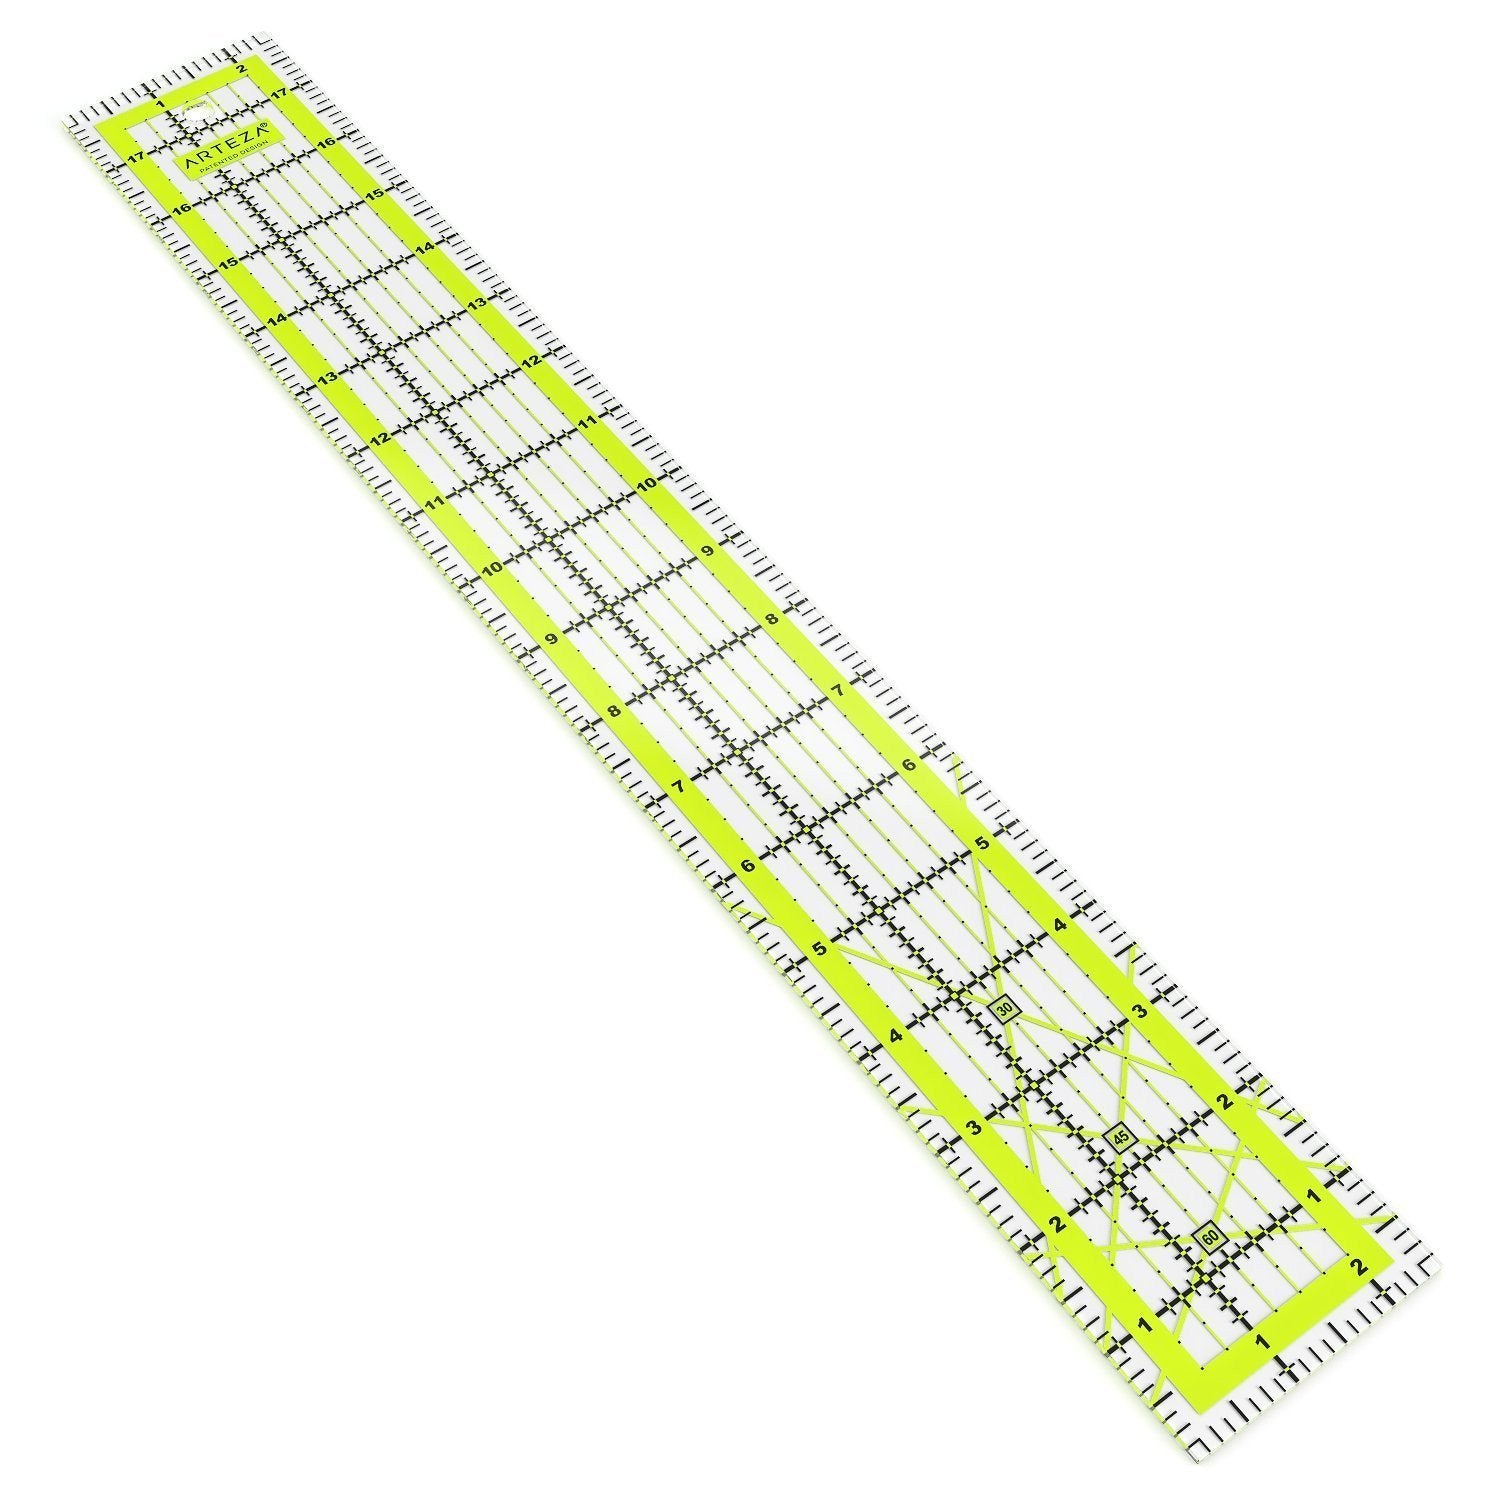 Sewing Ruler Garment Ruler Lightweight Portable Fashion Design Clear Ruler  for Sewing Quilting Crafts Making DIY Tools Measuring